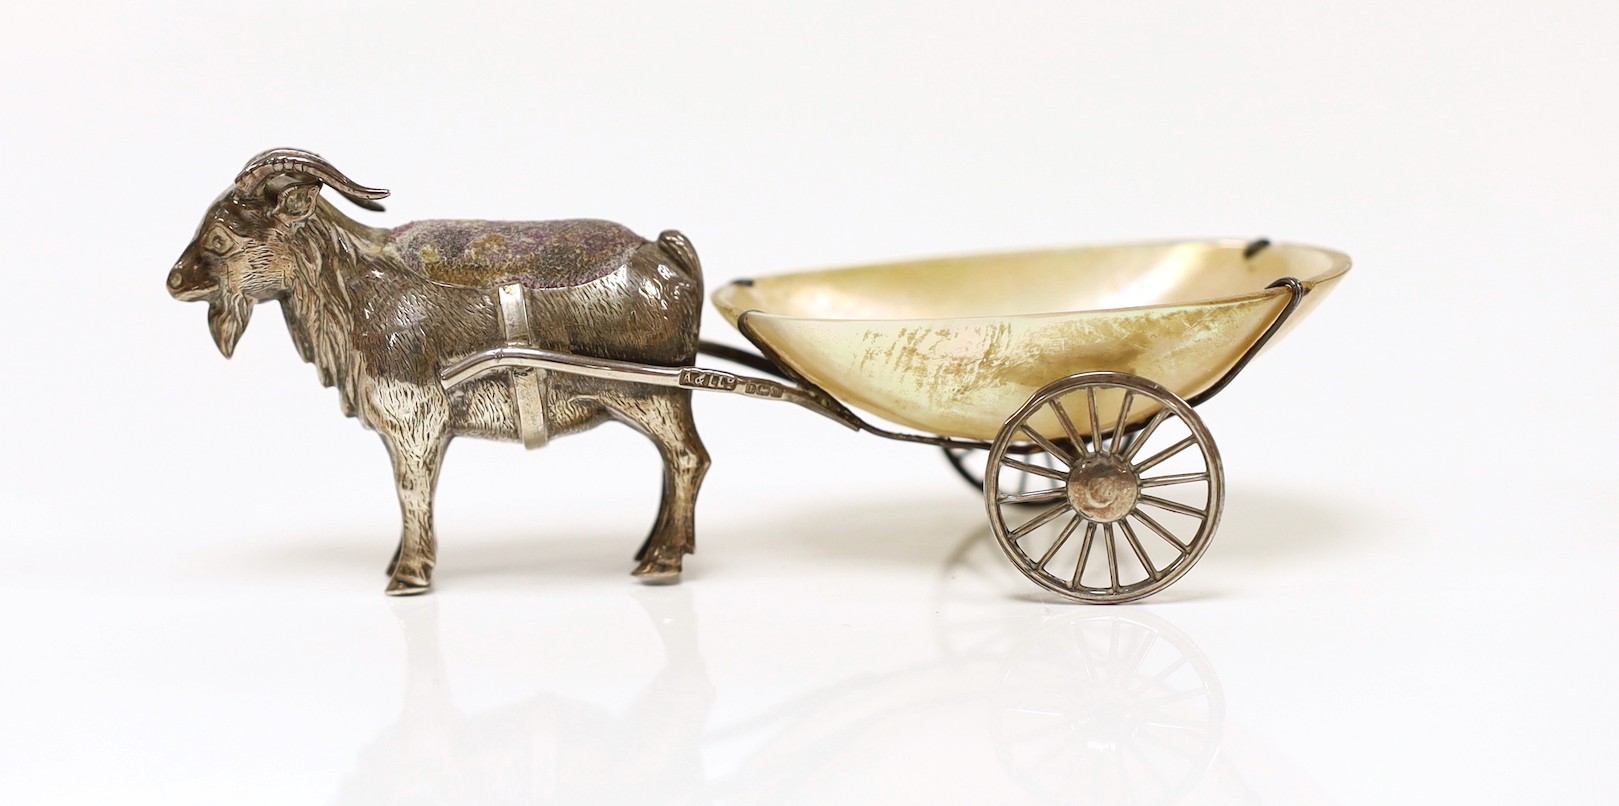 A George V silver and mother of pearl mounted novelty pin cushion, modelled as a goat pulling a cart, Adie & Lovekin, Birmingham, 1911, 11.2cm.